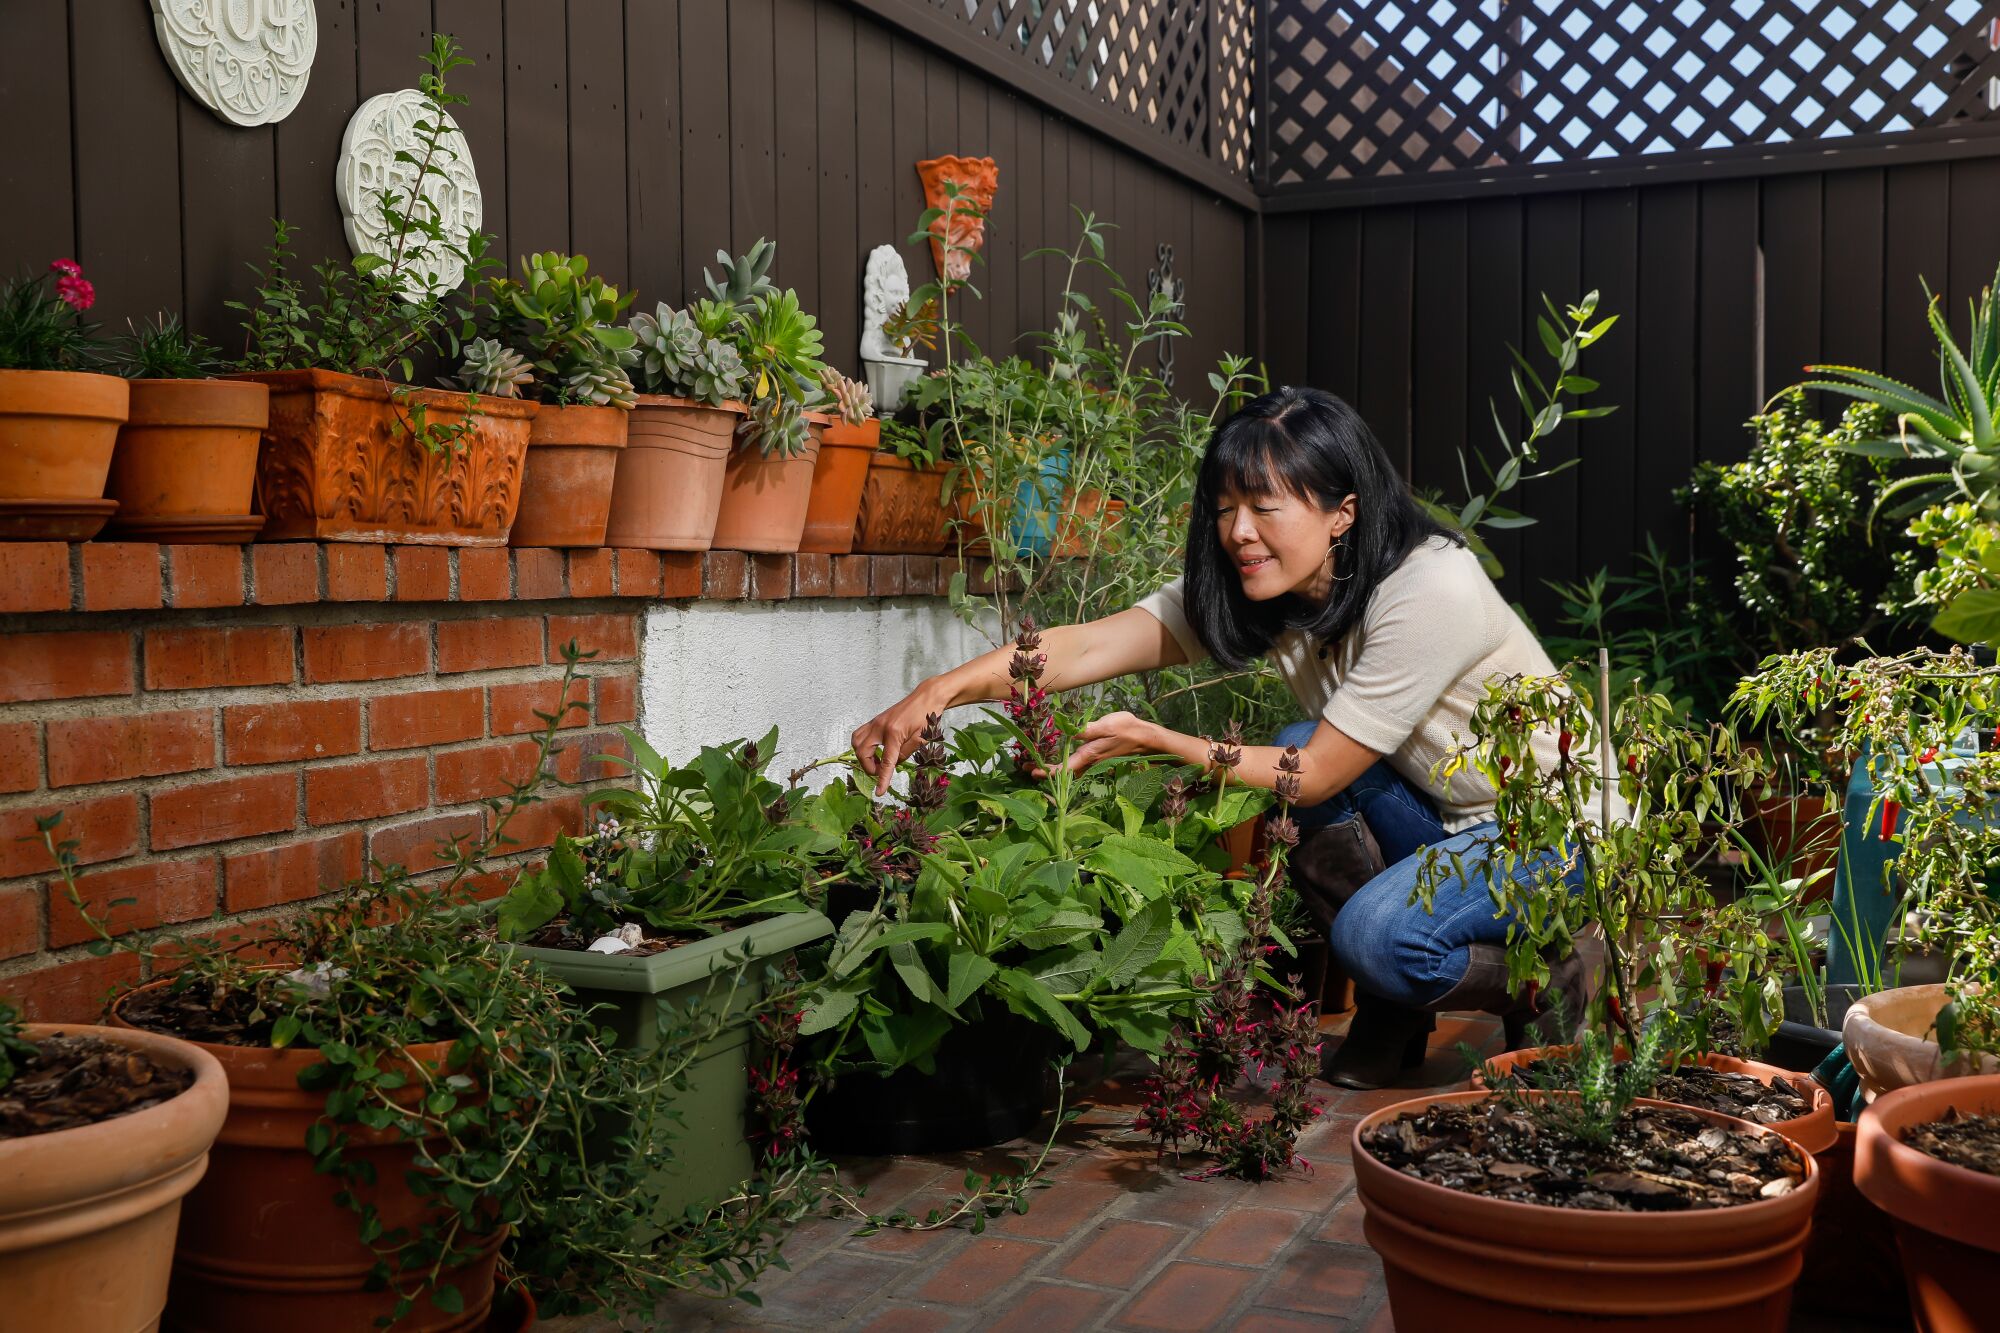 Barbara Chung reaches toward a plant on her patio, surrounded by dozens of different native plants.